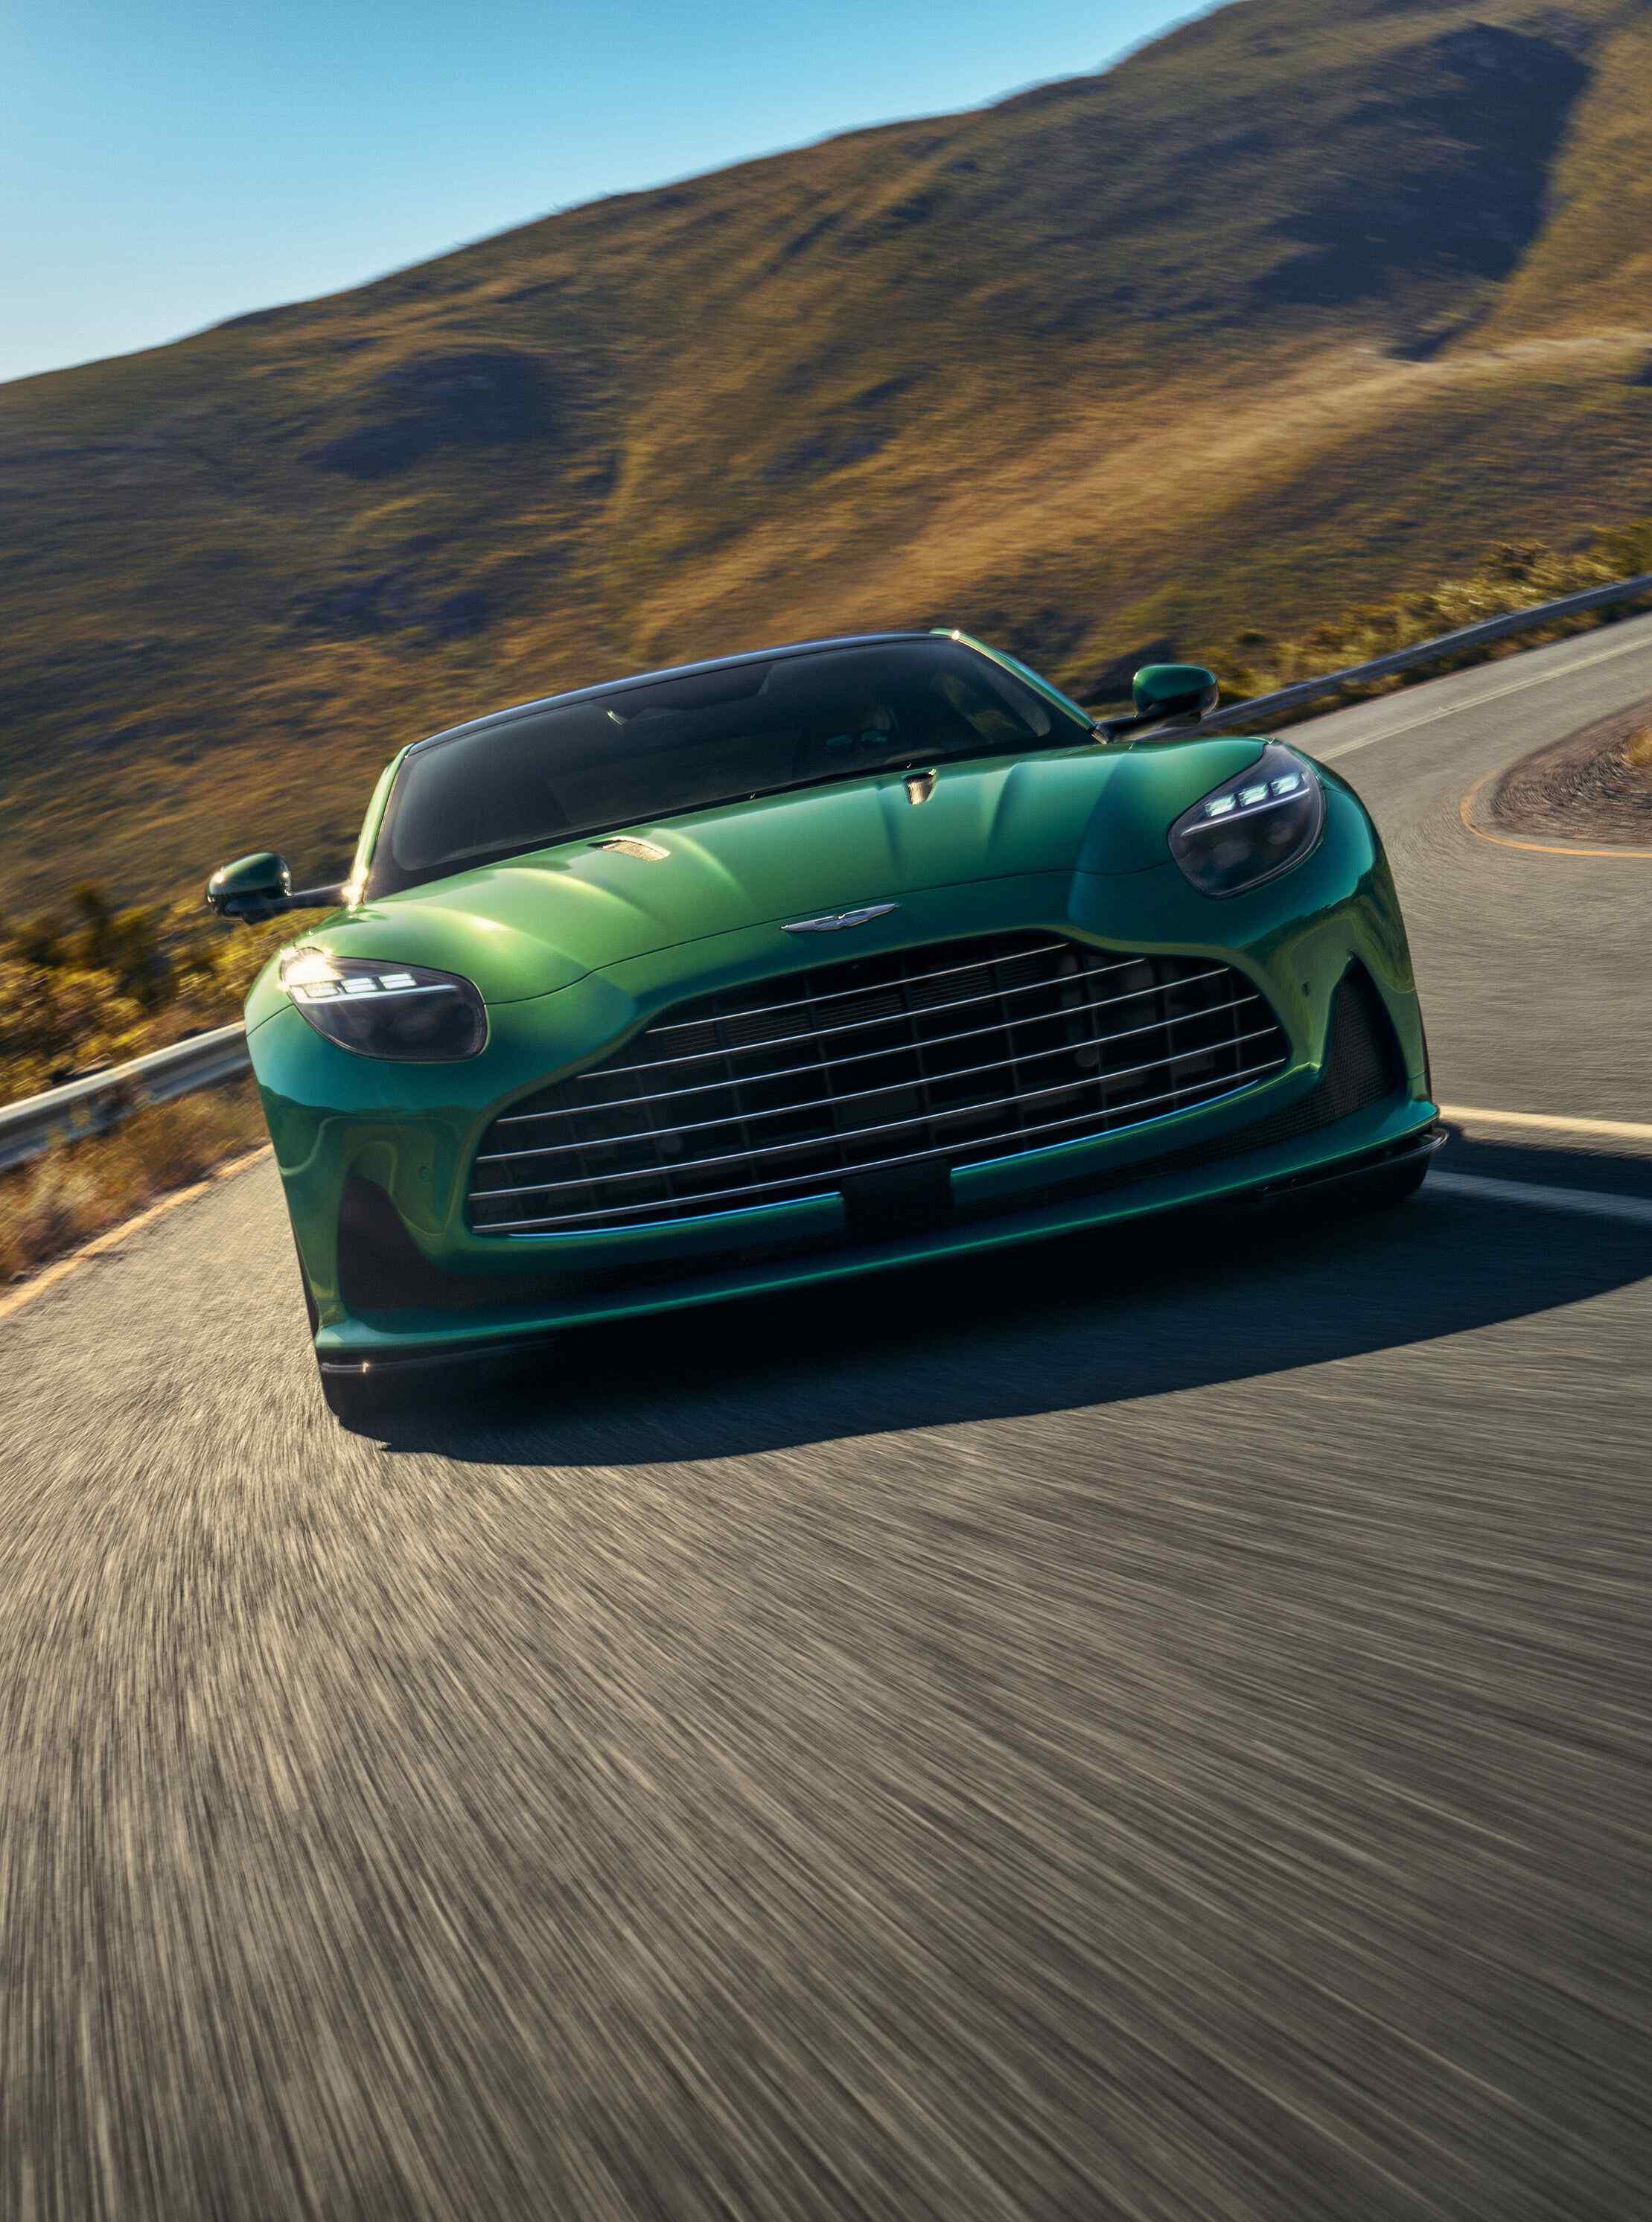 Get behind the wheel of the iconic Aston Martin DB12. Feel the raw power and enjoy a luxurious drive with the latest model from this iconic brand.